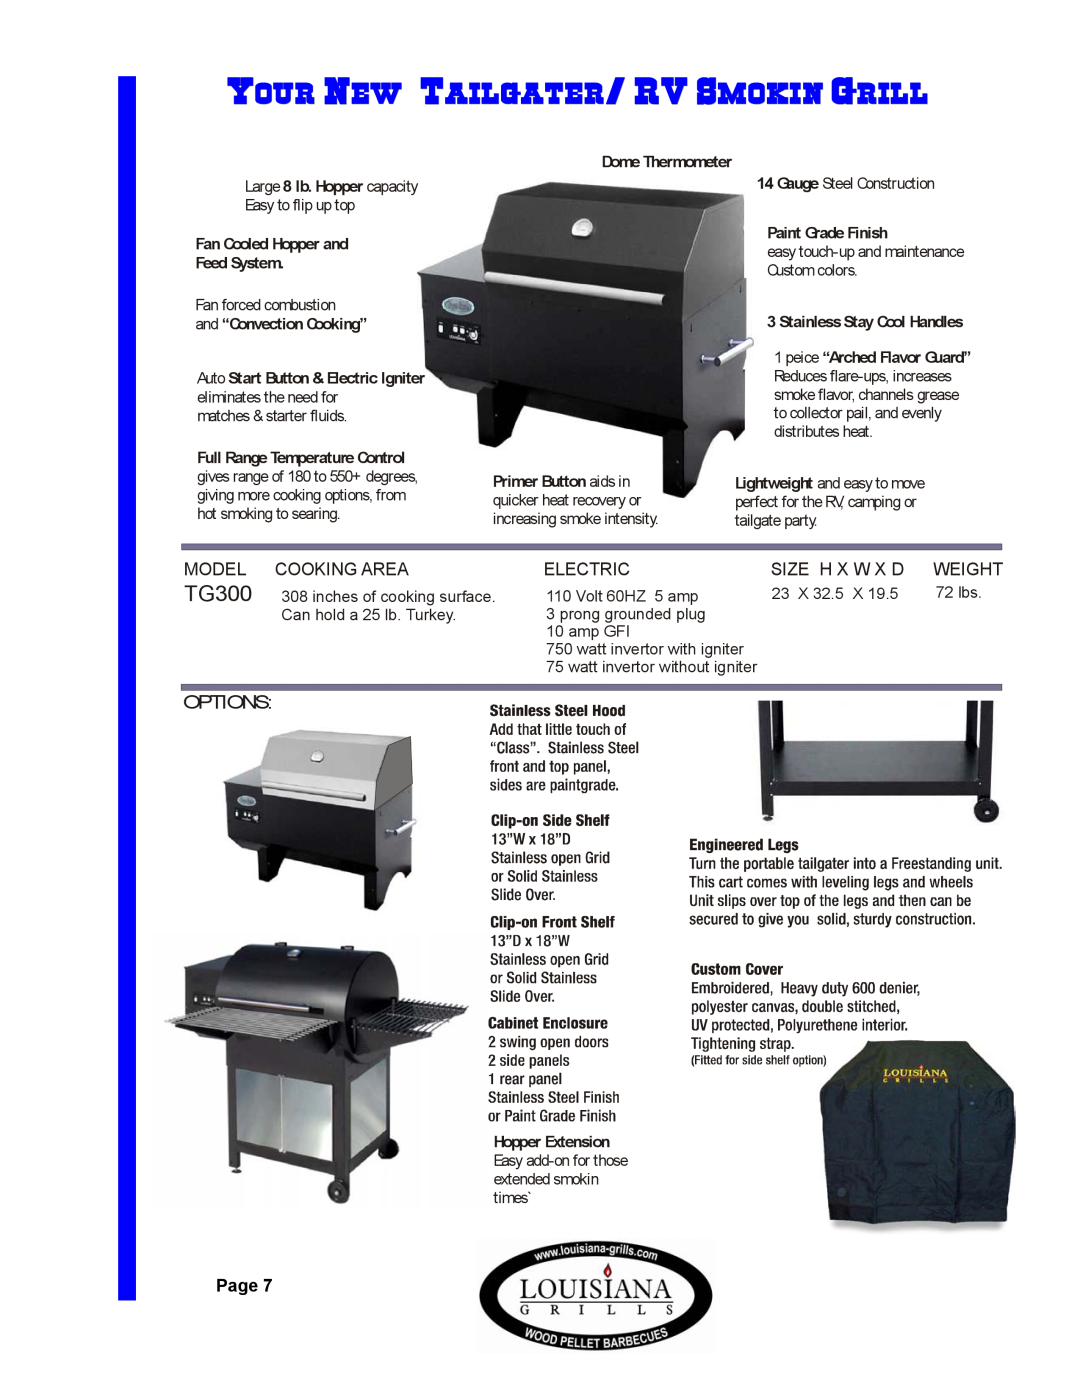 Dansons Group 570, 680 Your New “Tailgater/ Rv Smokin Grill’’, Options, PagePage7, Dome Thermometer, Paint Grade Finish 